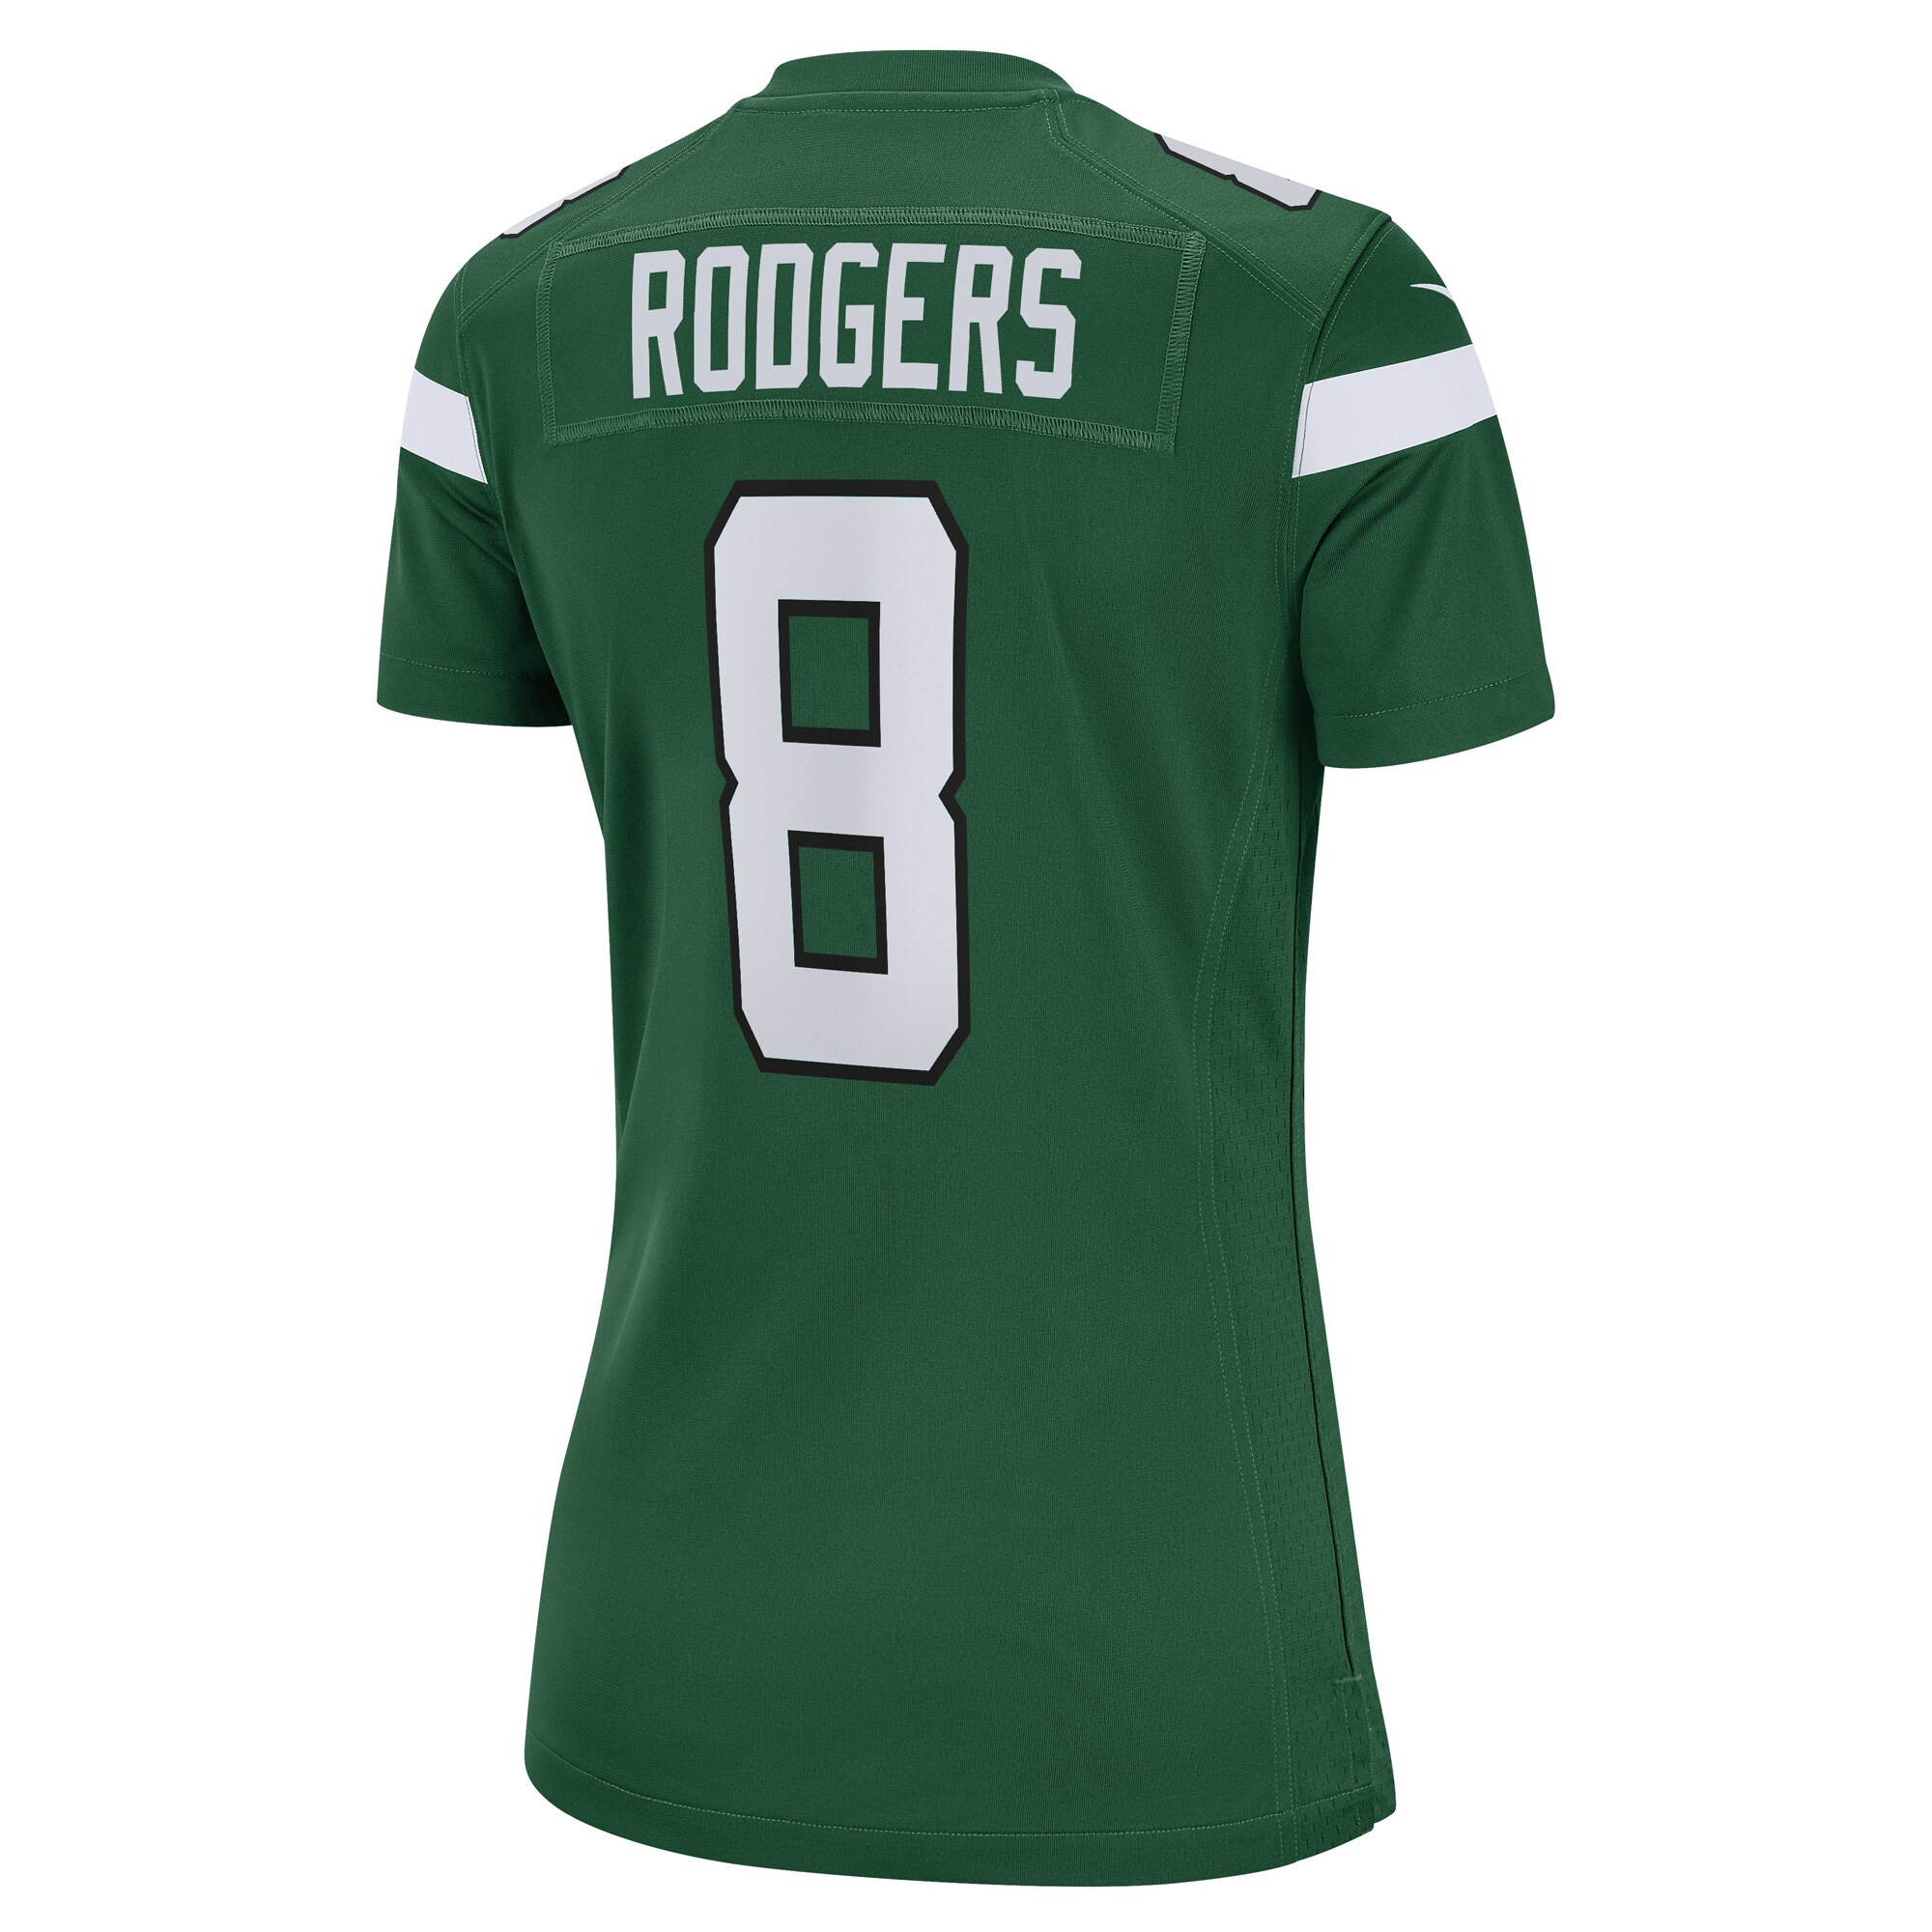 Aaron Rodgers New York Jets Women's Game Jersey - Gotham Green